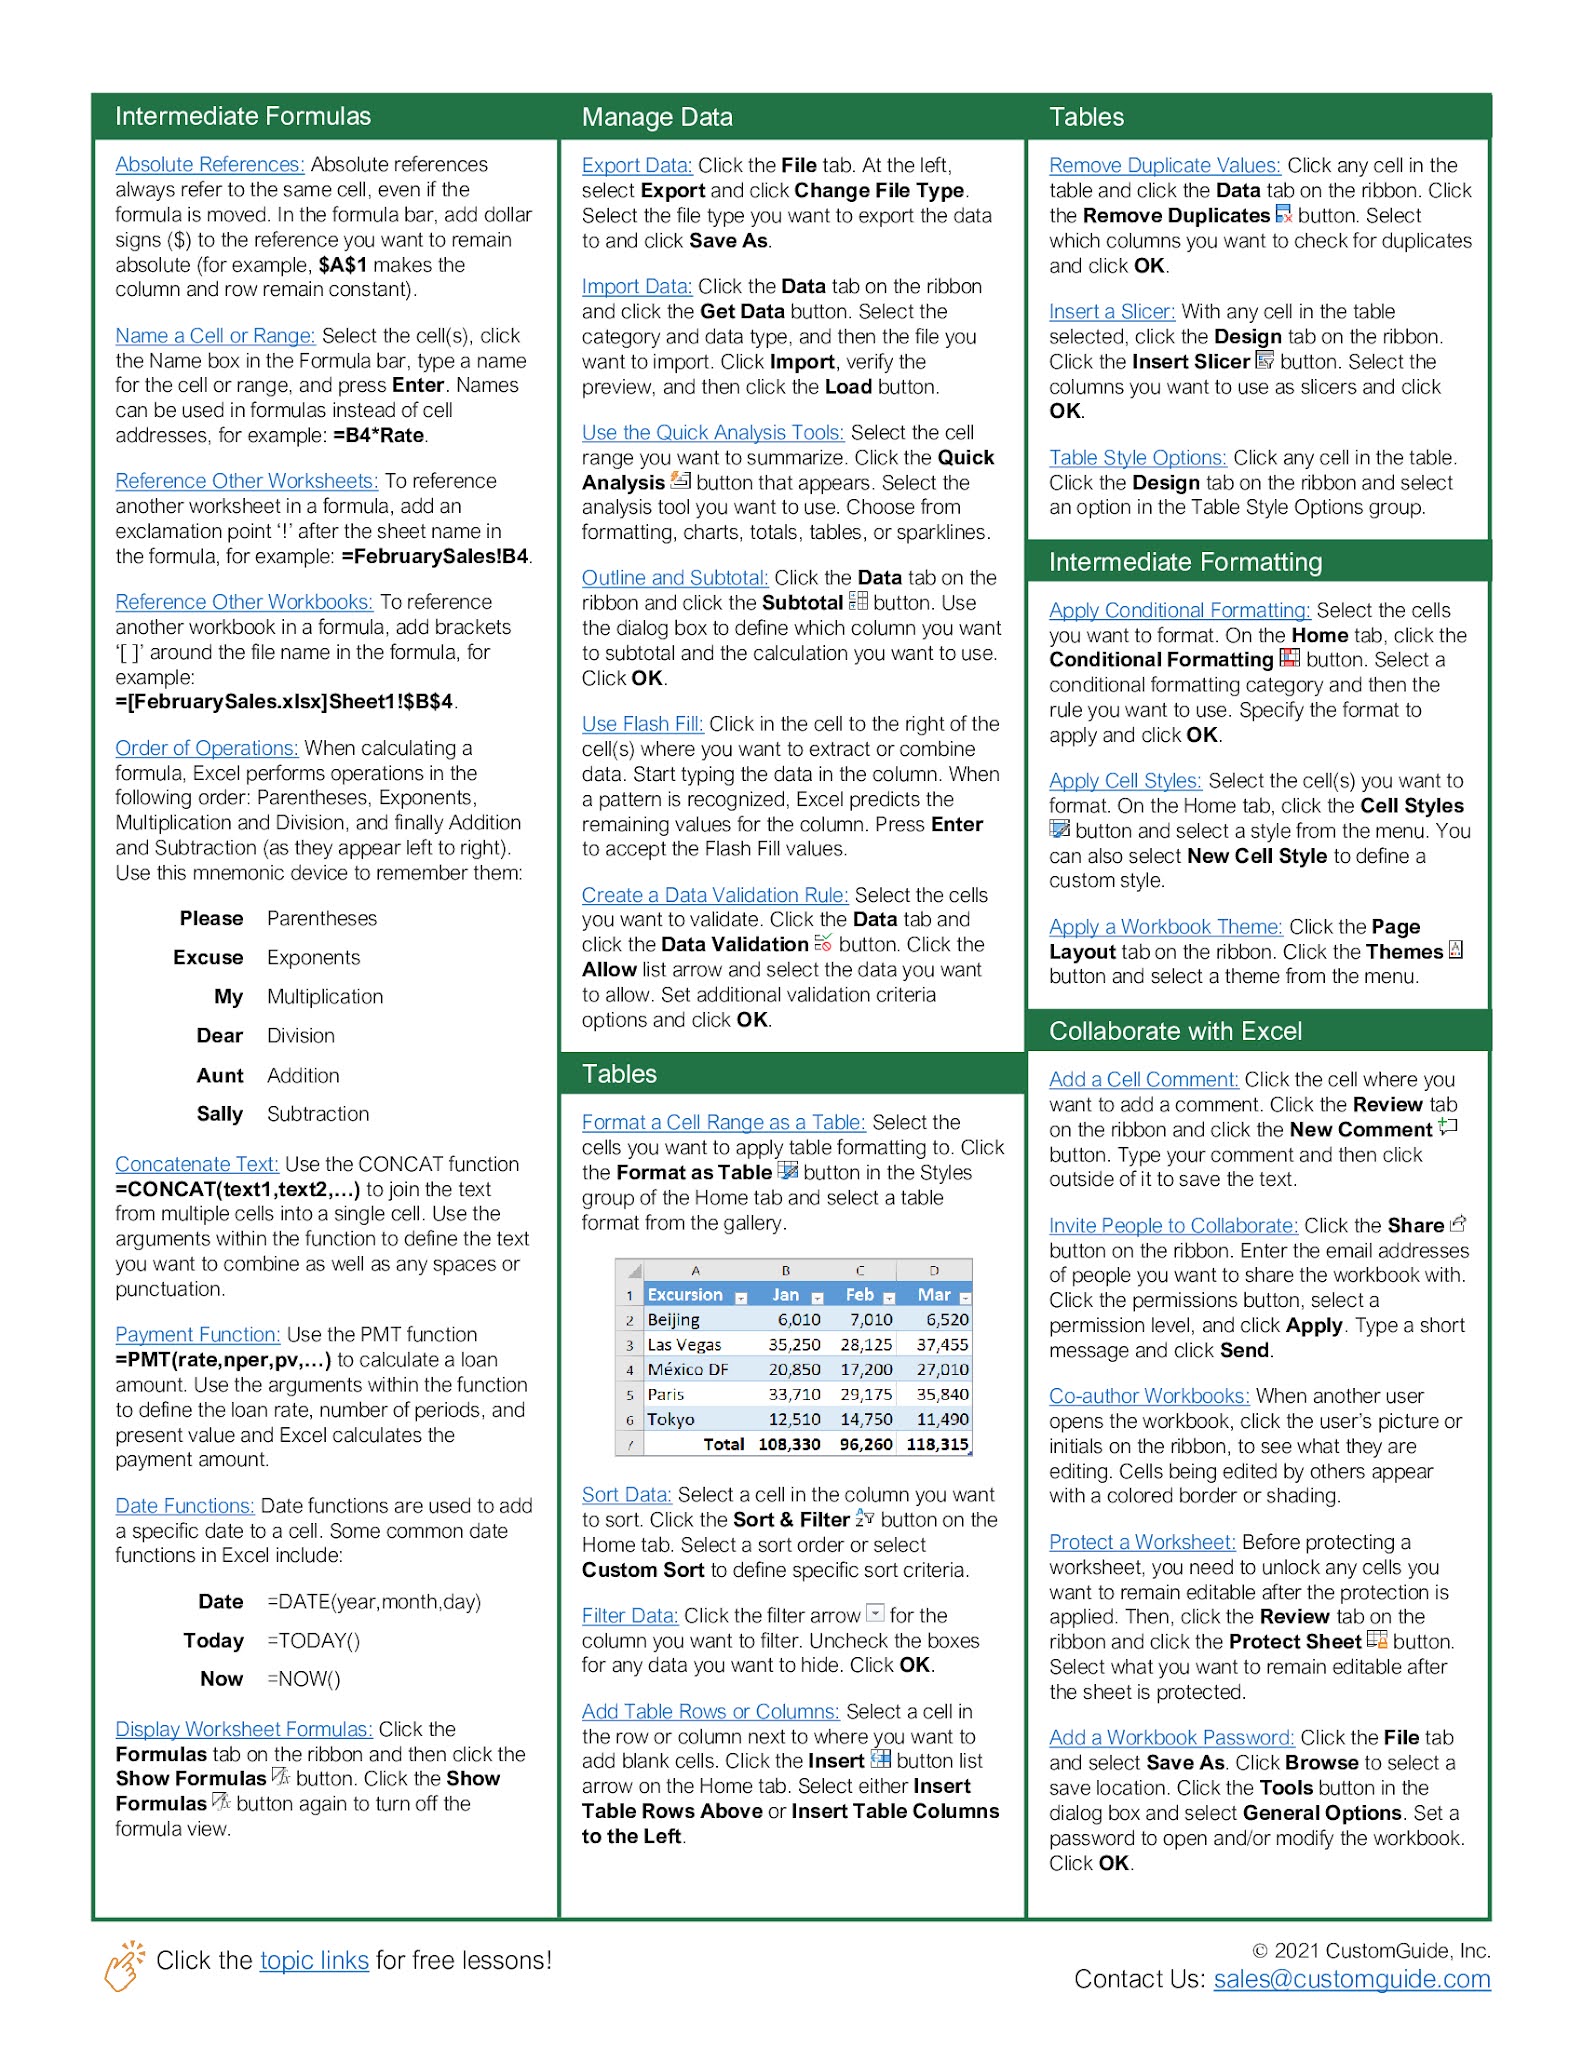 excel-cheat-sheet-page-1-free-excel-cheat-sheet-provided-flickr